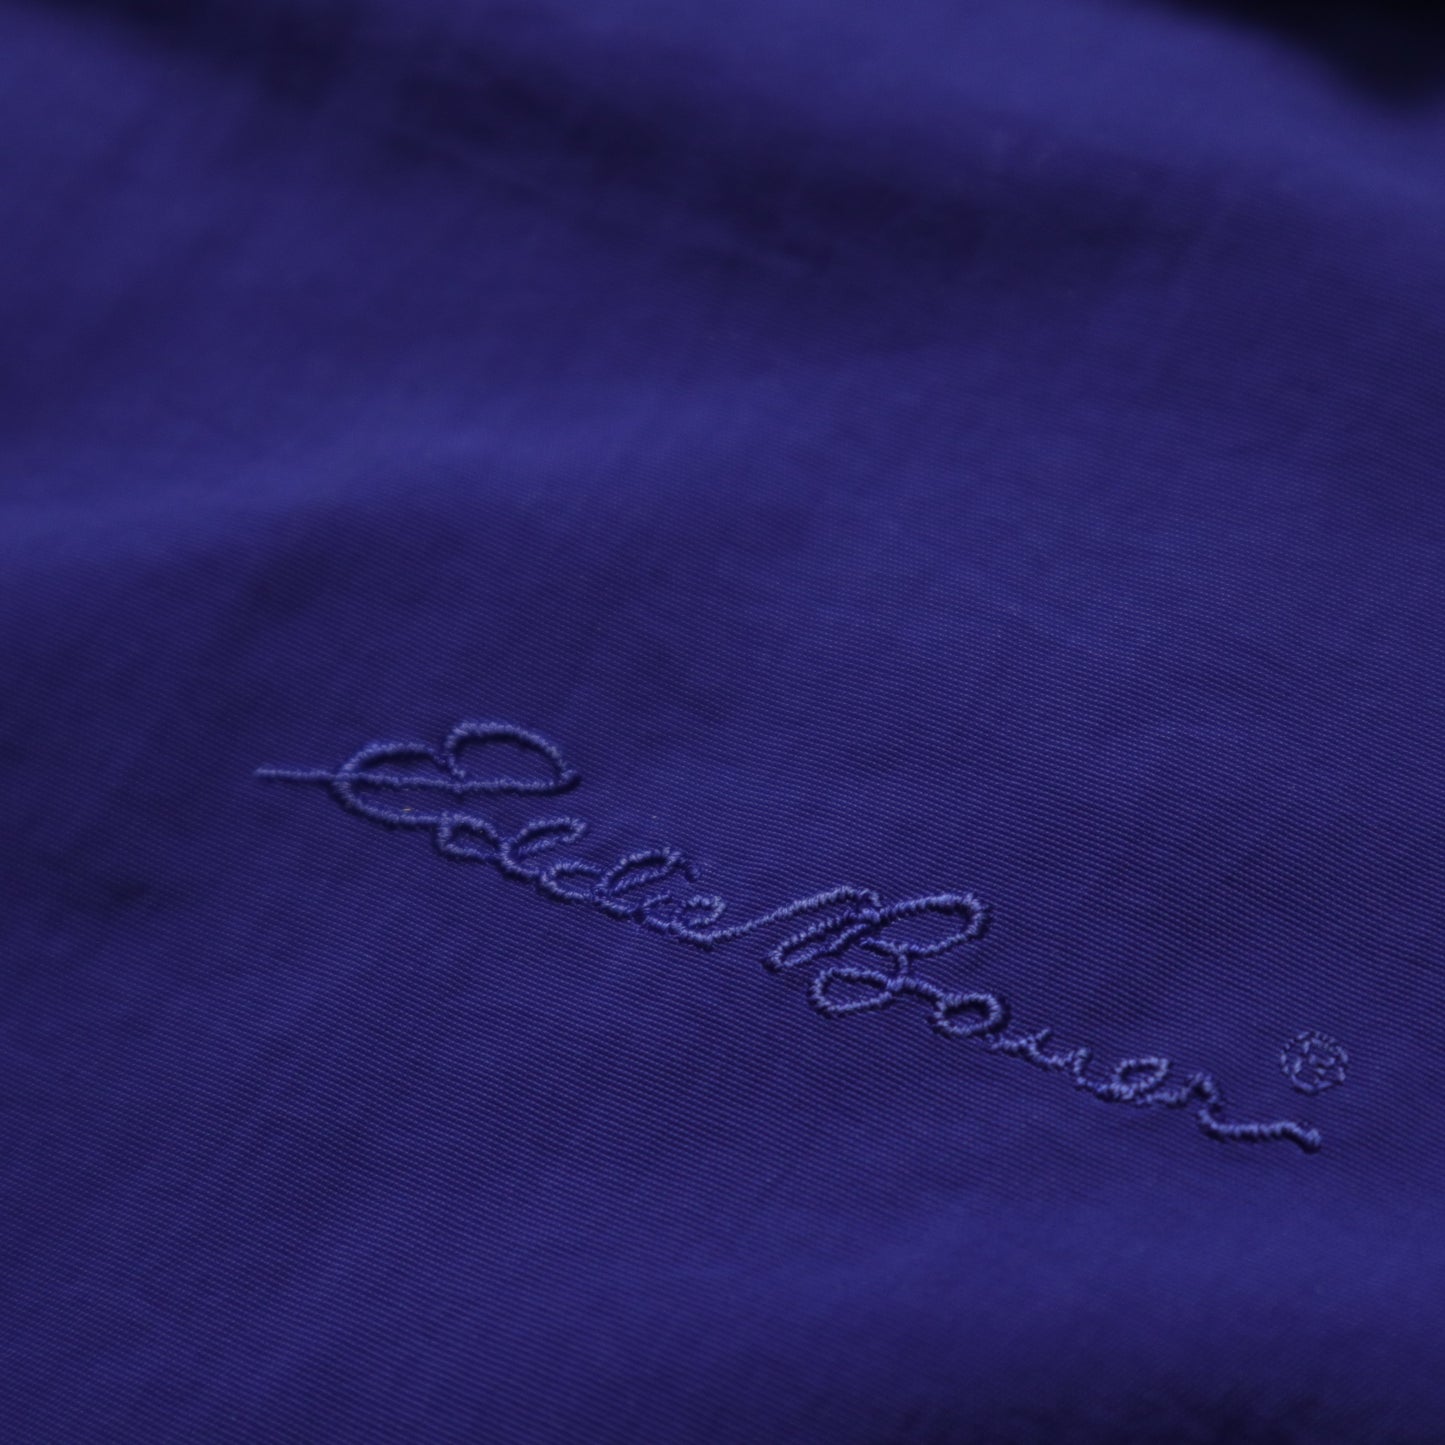 90s EDDIE BAUER American-made blue and purple windproof warm jacket